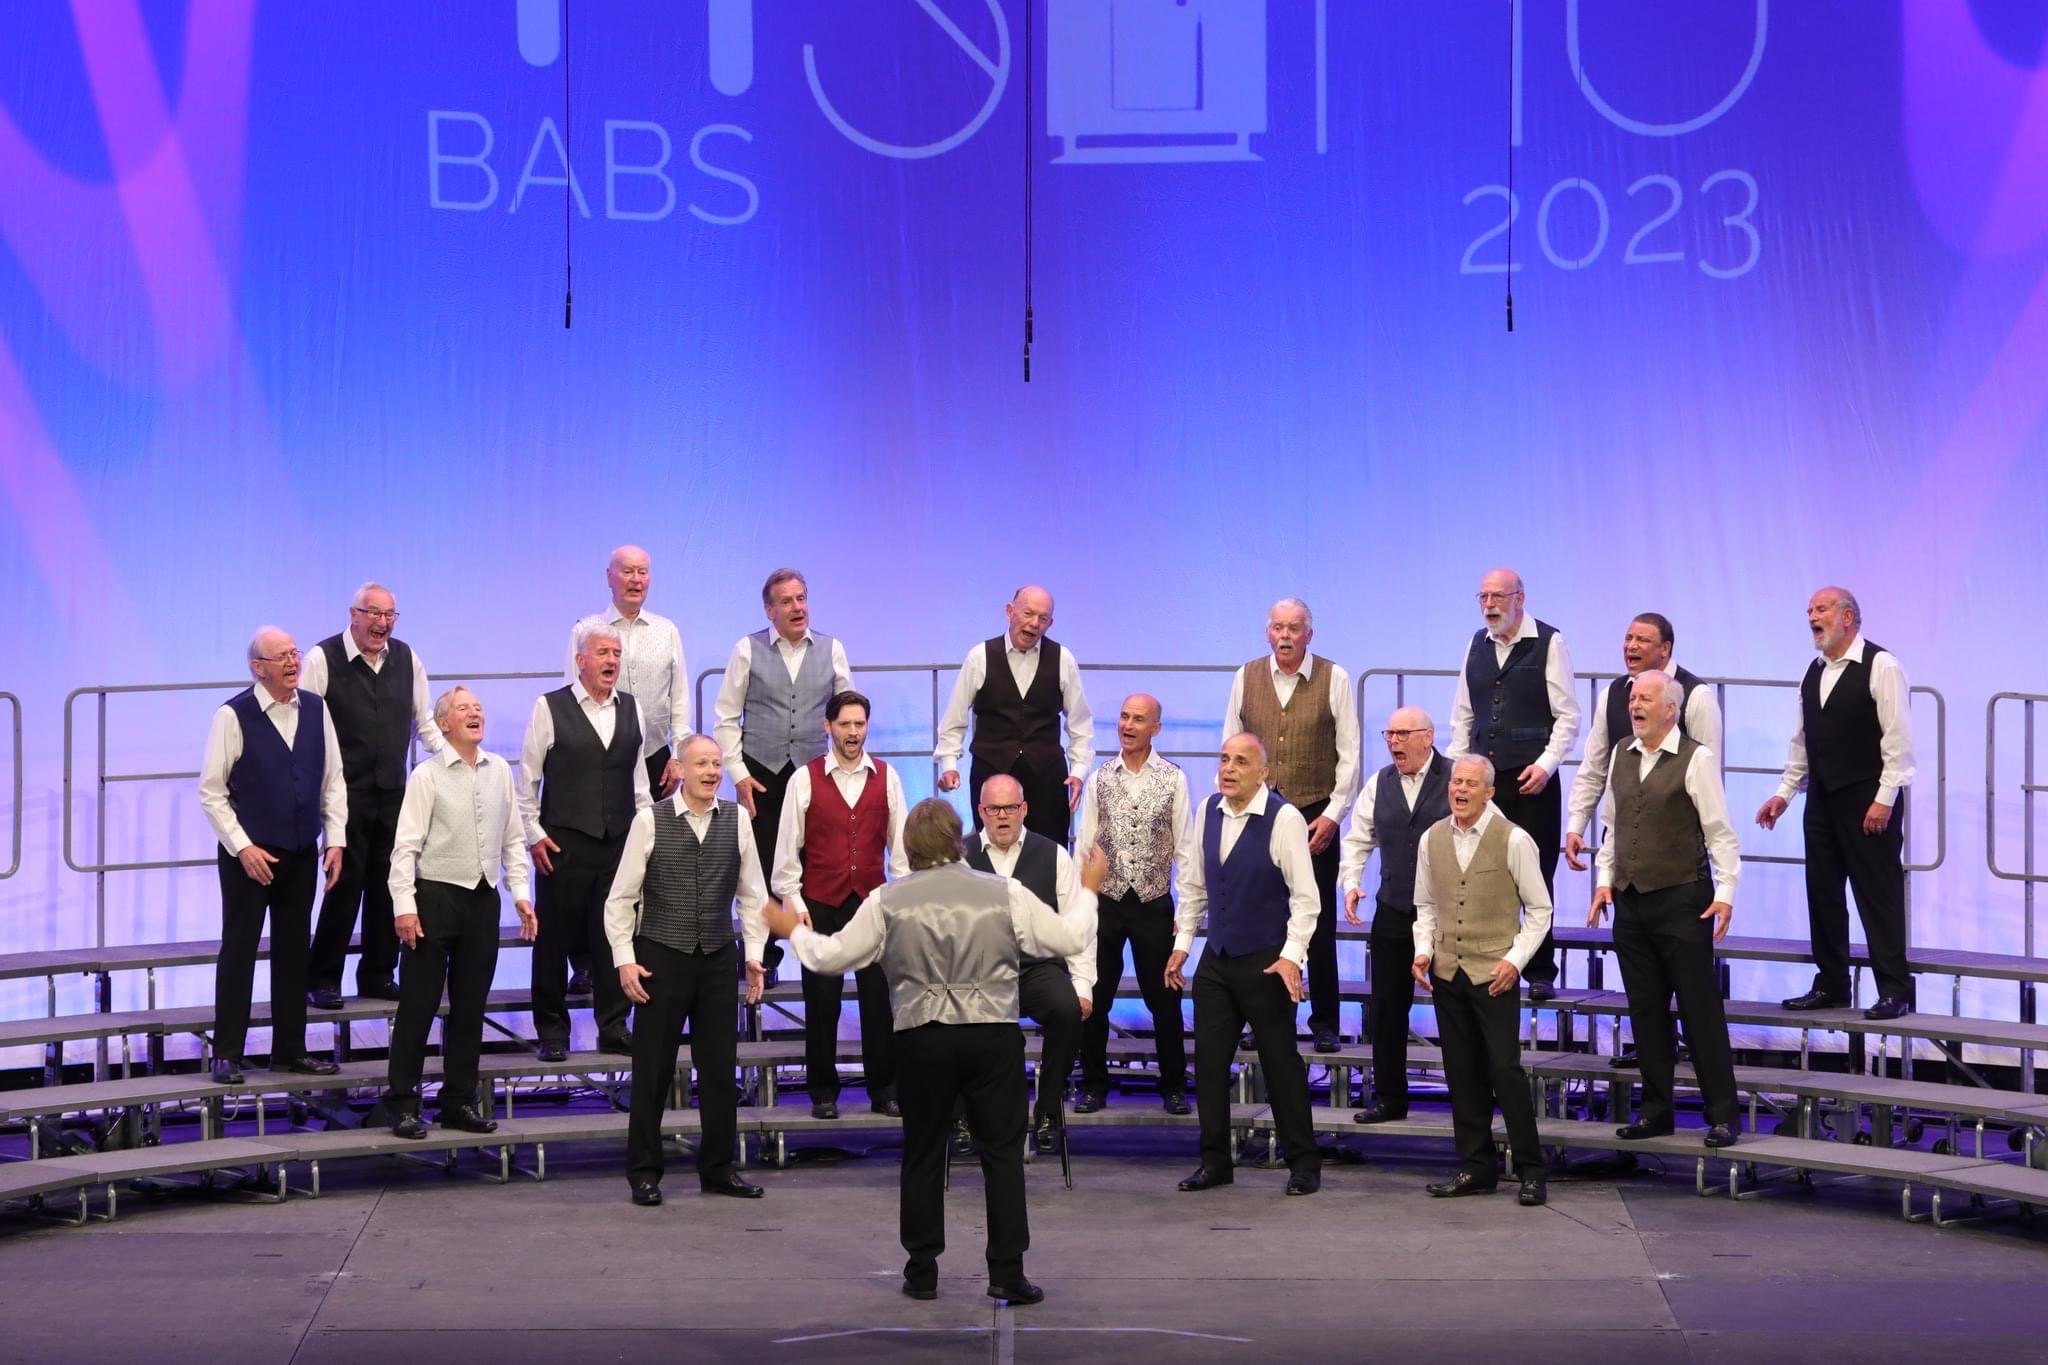 May 2023 - Men's chorus competes at national barbershop competition